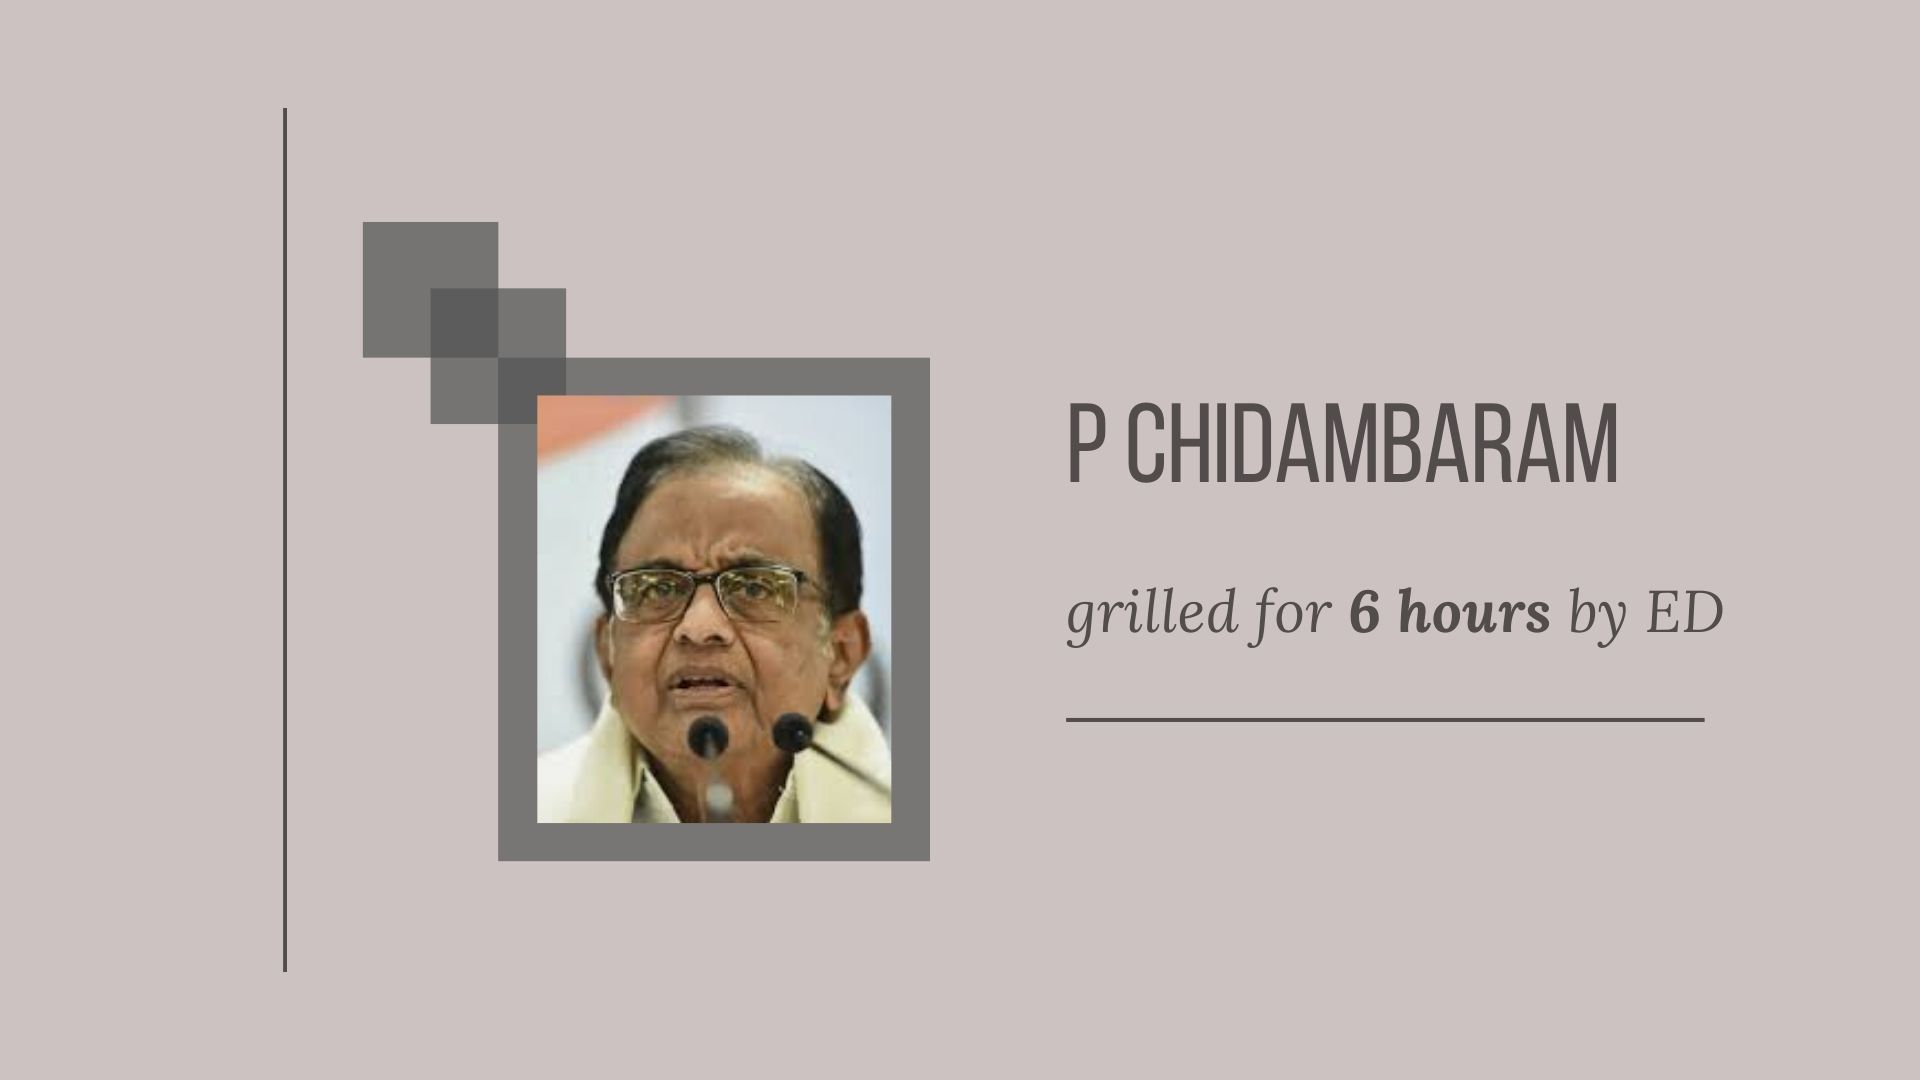 Chidambaram is facing chin music at the hands of the ED for having sanctioned purchase of 111 aircraft at an excessively high rate